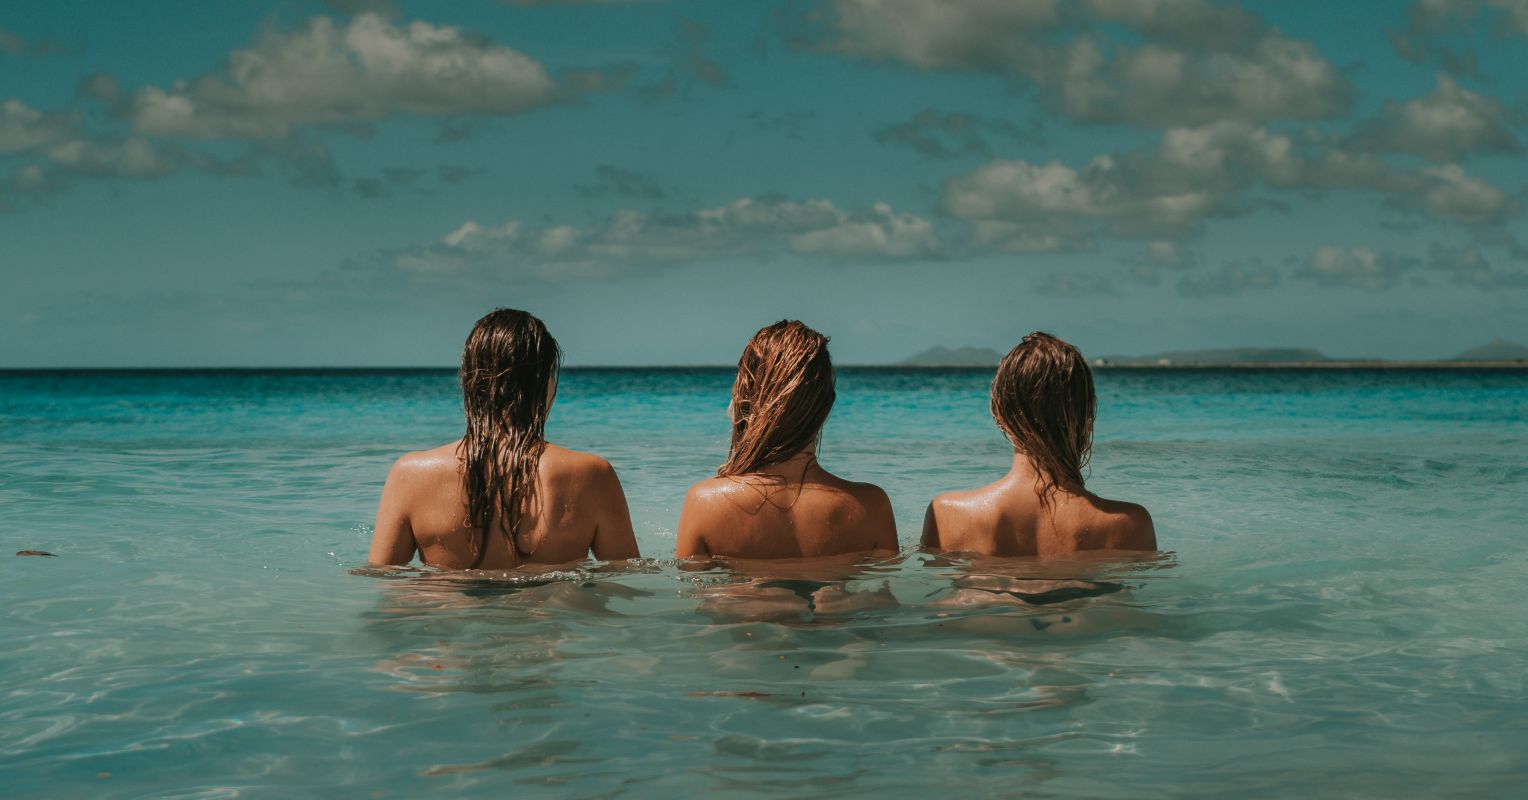 Spending Time Naked With Strangers Can Improve Body Image Psychology Today photo